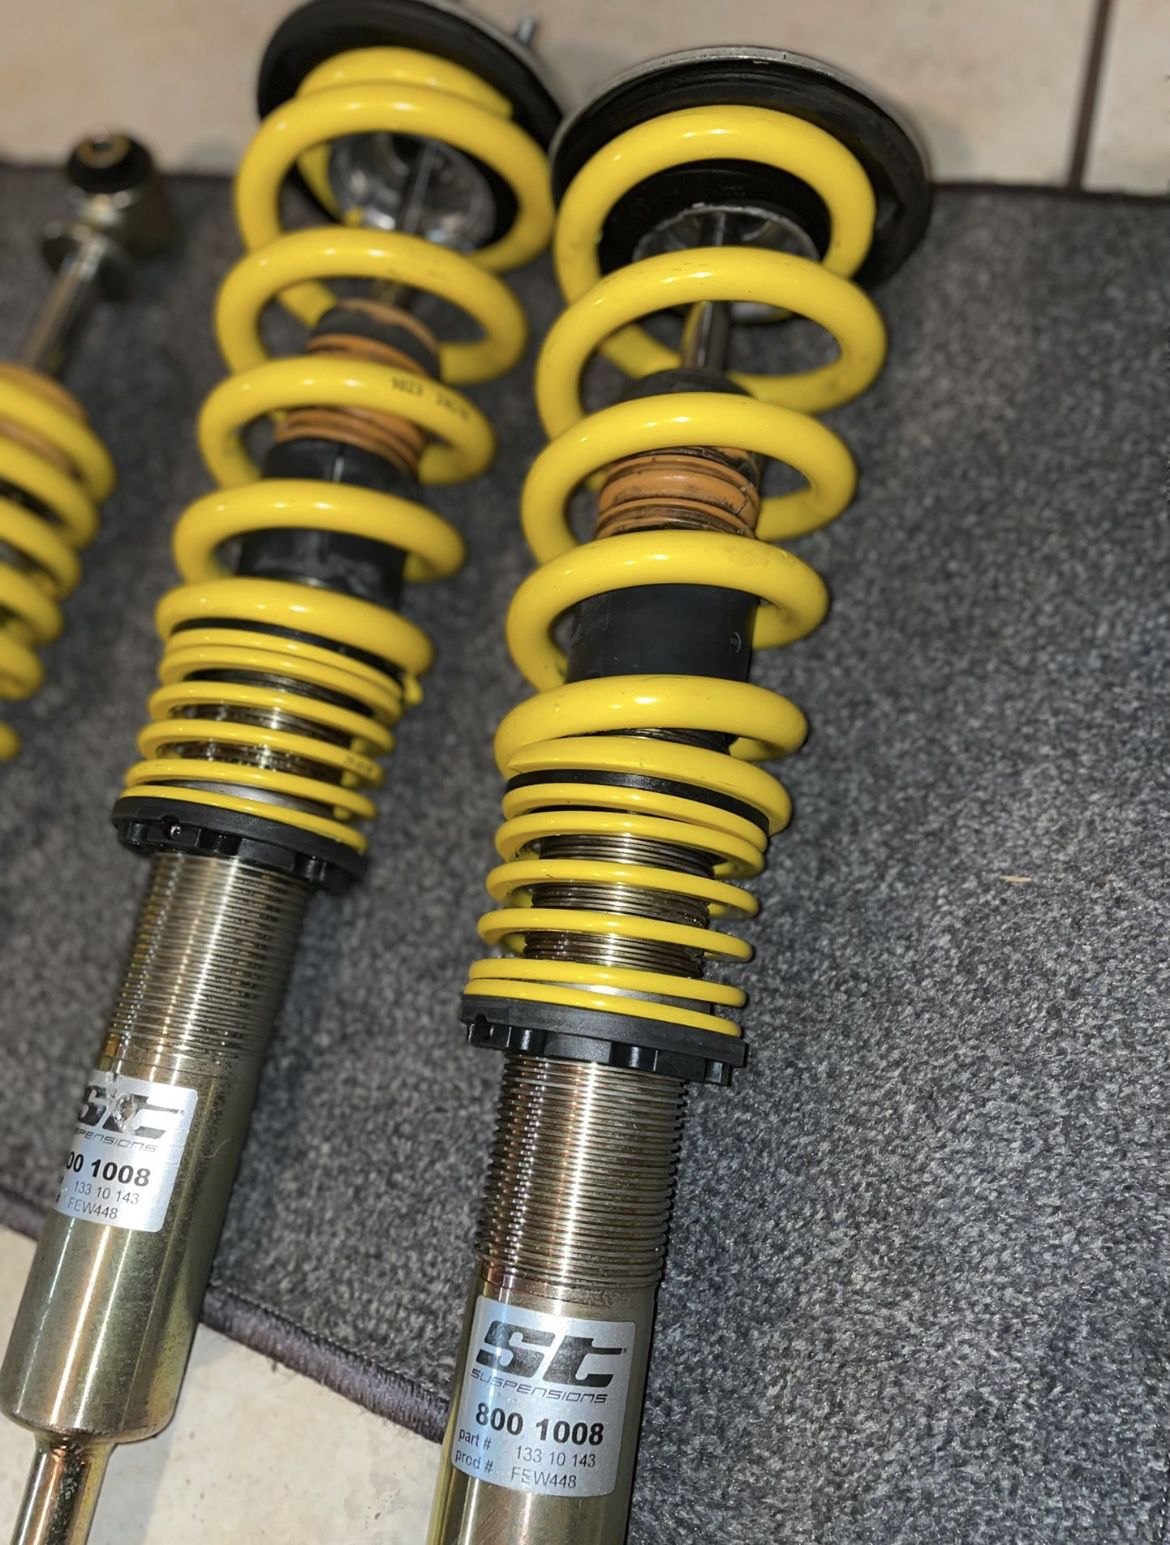 Audi A4 Coilovers Audi S4 Coilovers Audi Parts 